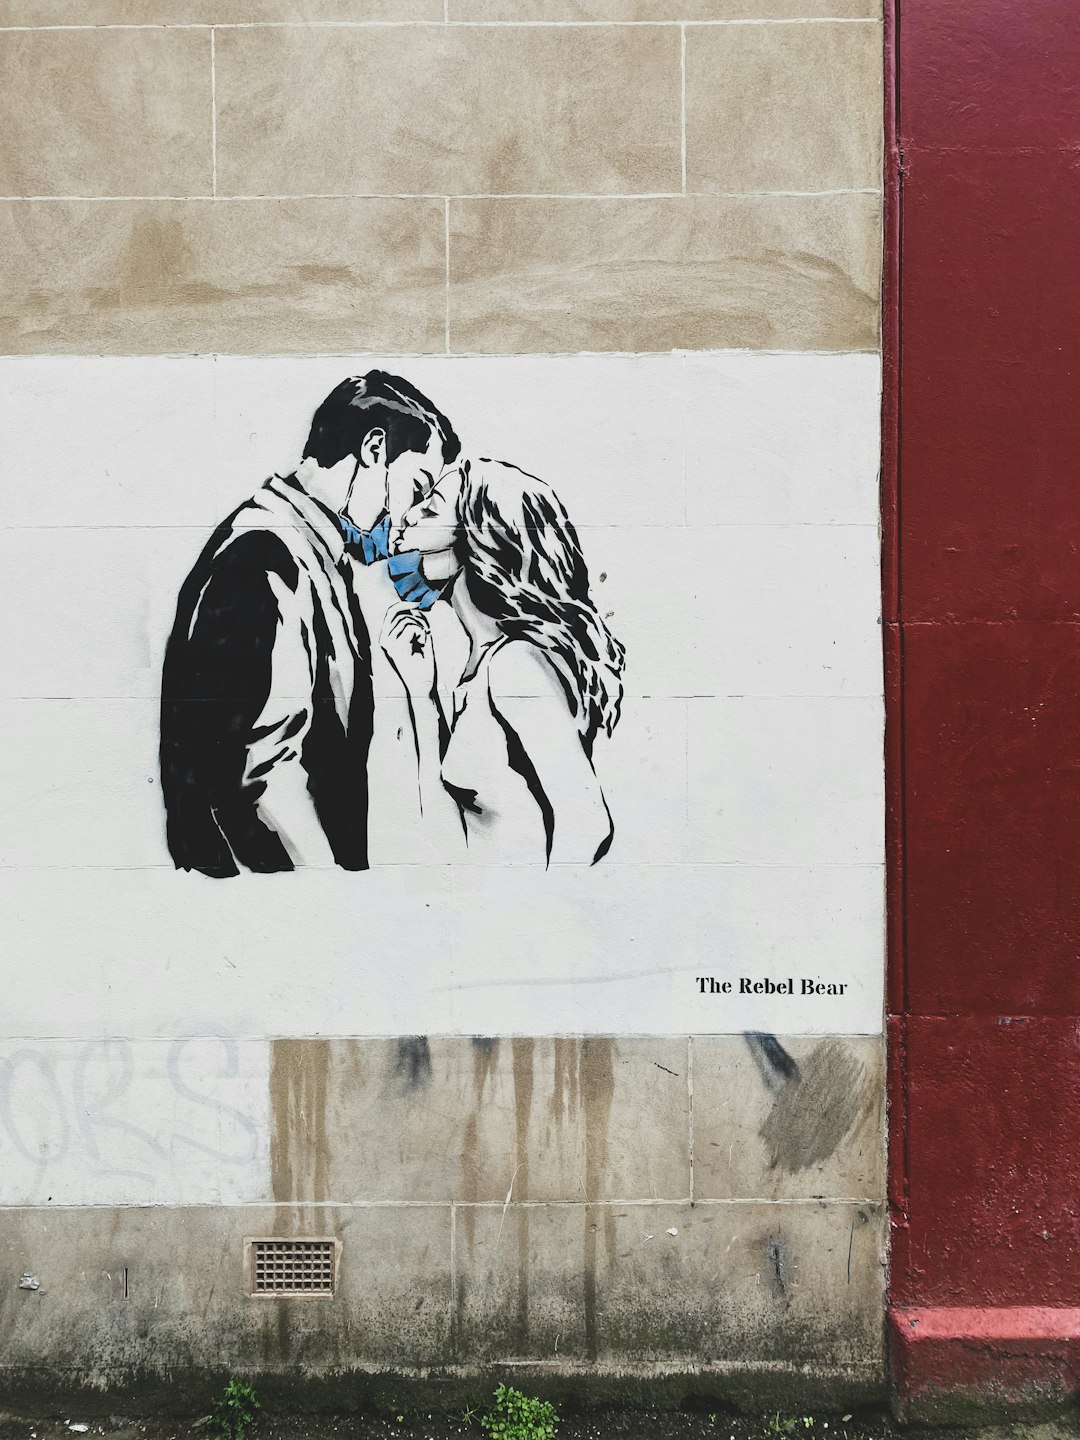 A photograph of work by street artist The Rebel Bear, shot in Glasgow and inspired by the Covid-19 outbreak.